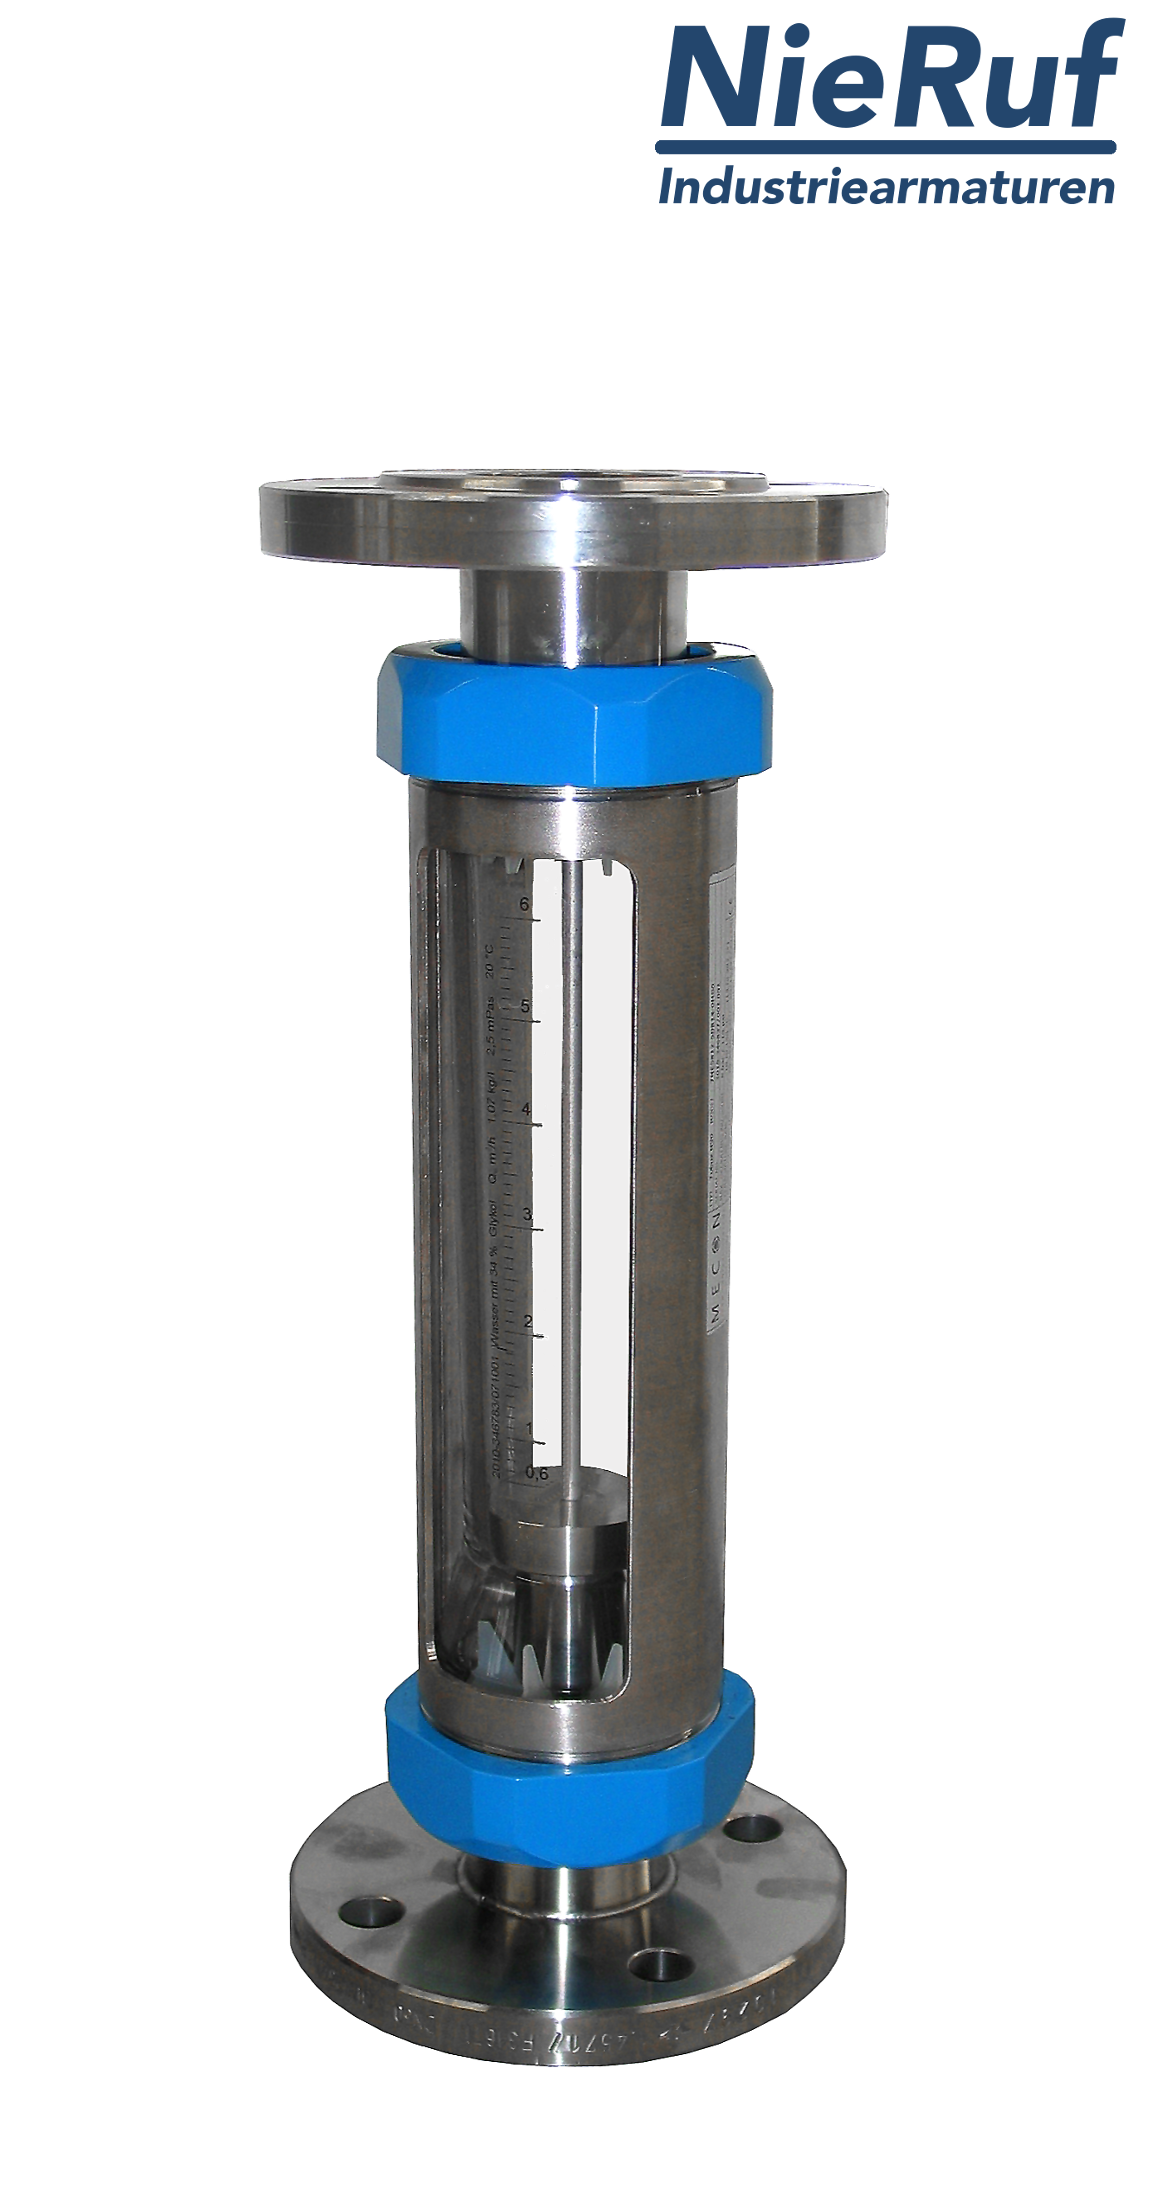 Variable area flowmeter stainless steel + borosilicate flange DN32 250.0 - 2500 l/h water FKM